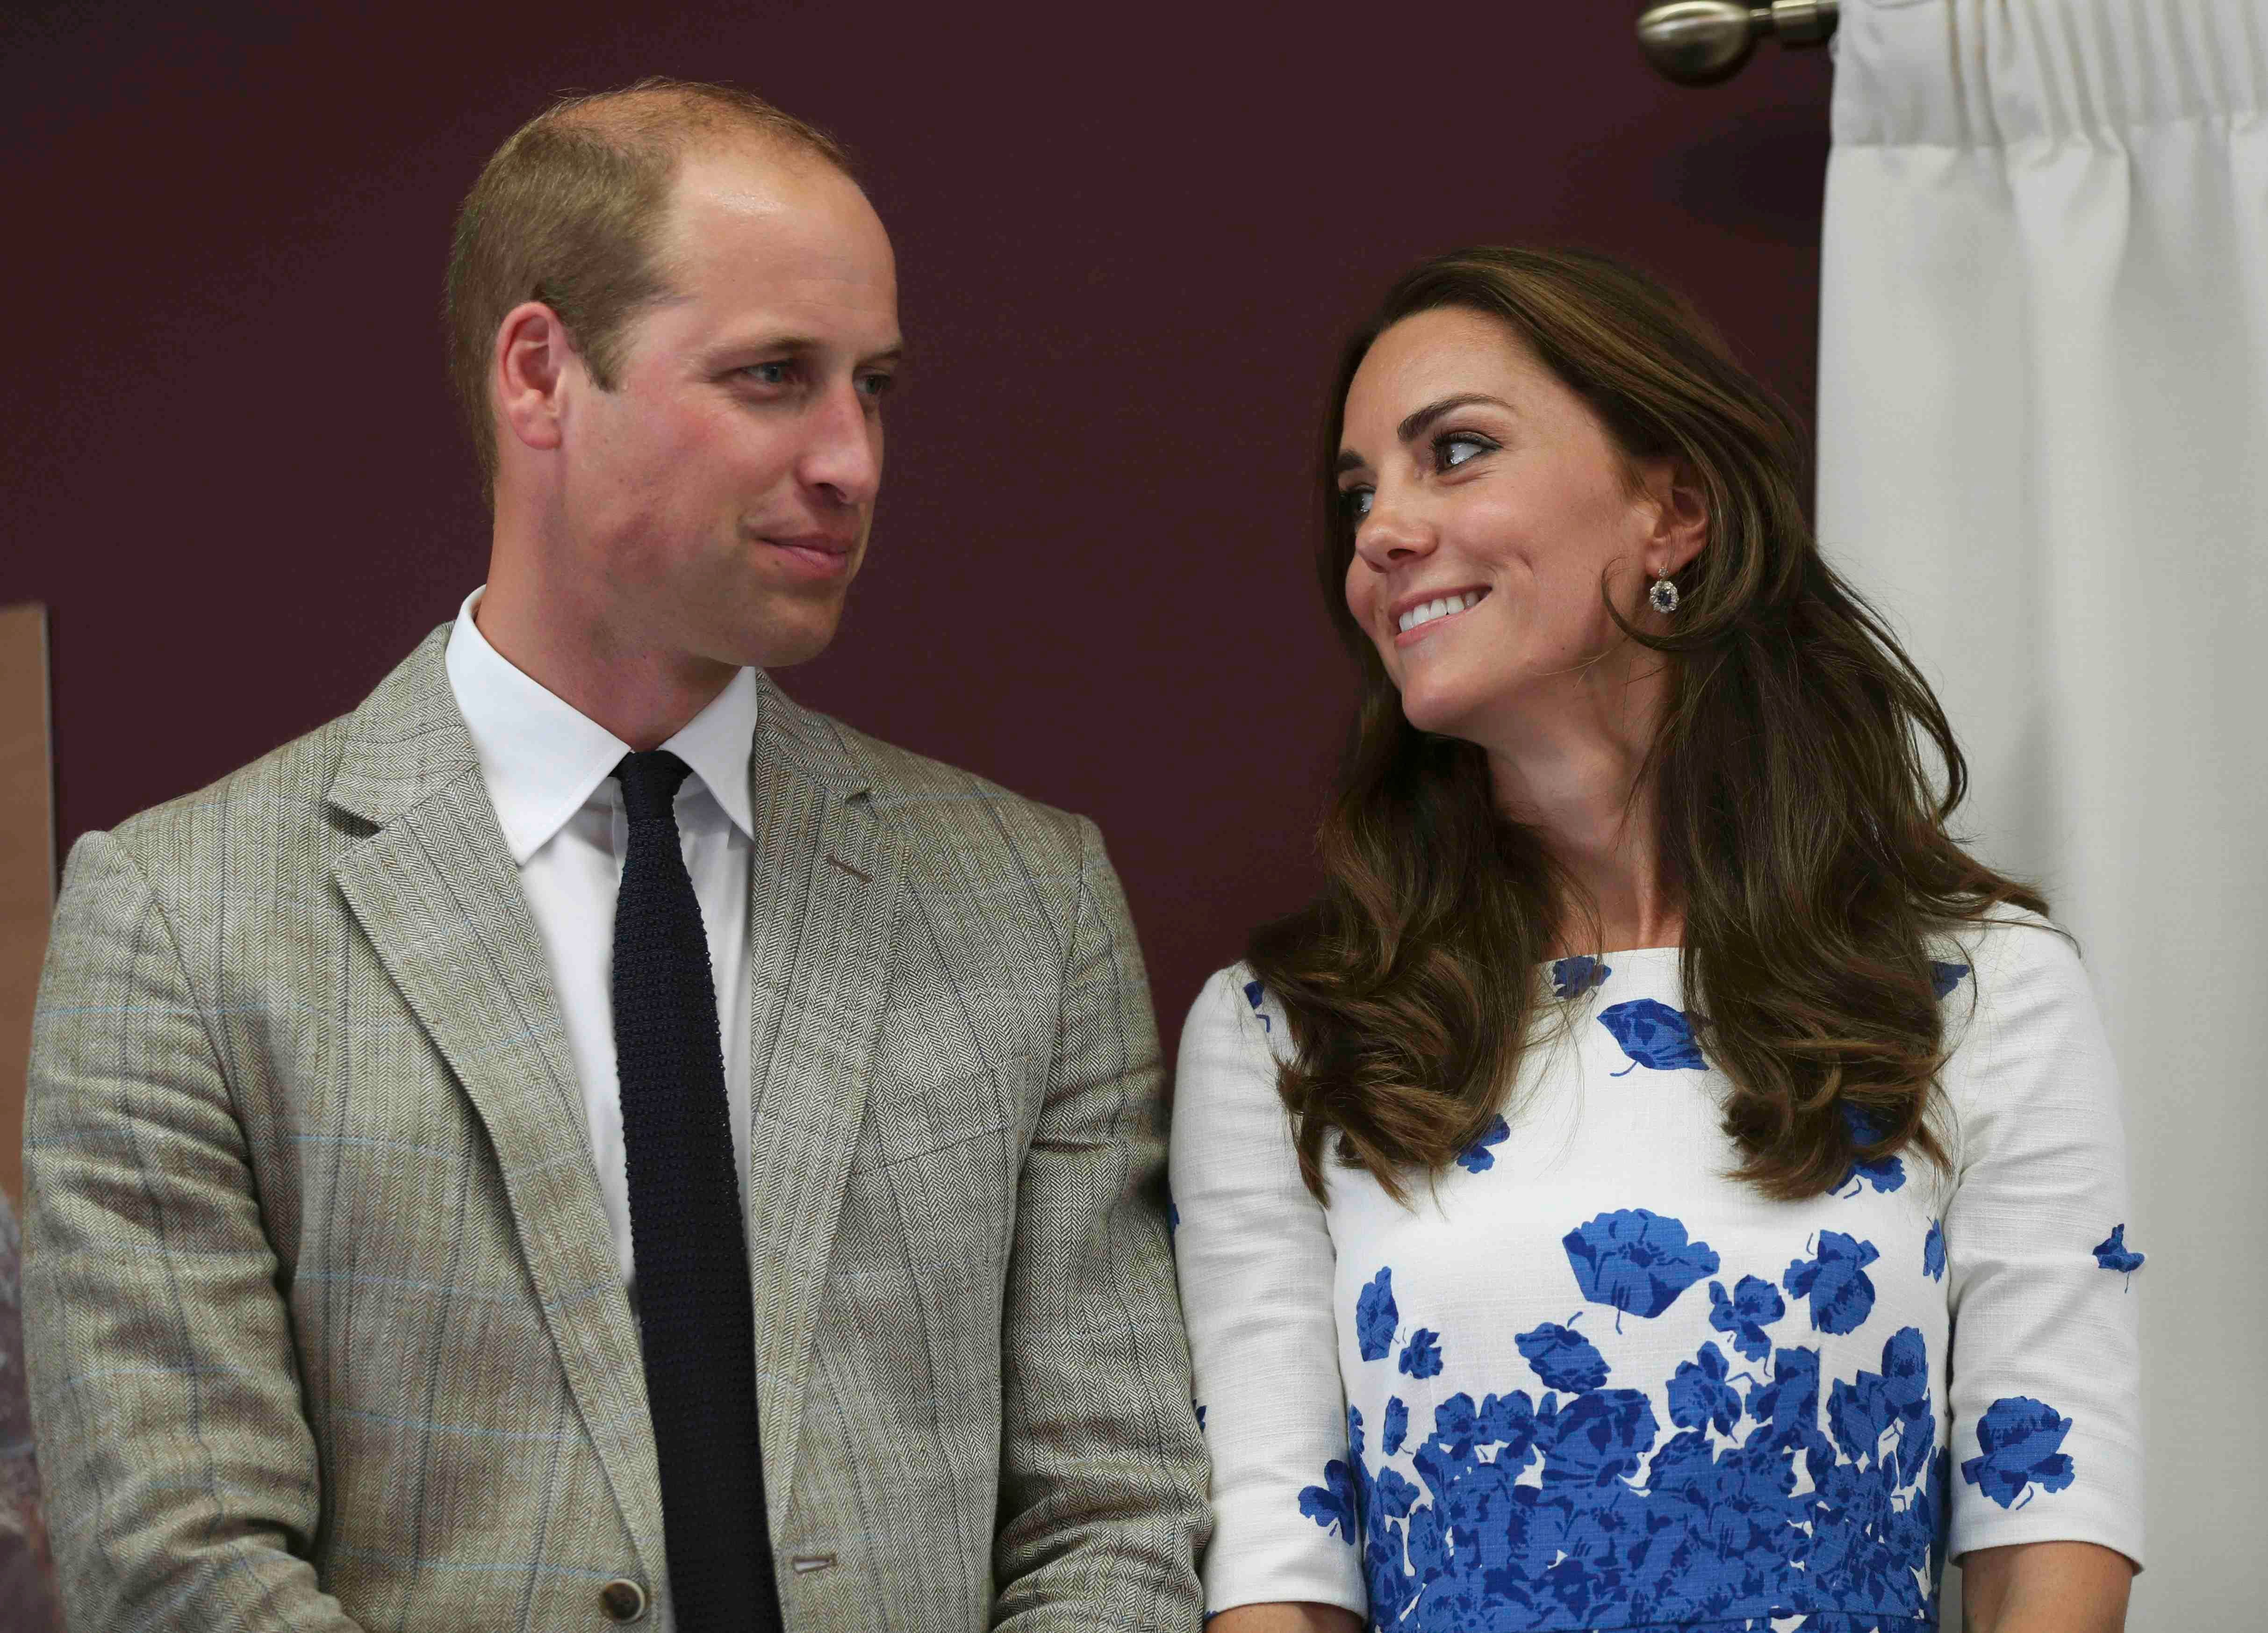 Prince William and Duchess of Kate during their visit to Keech Hospice Care on August 24, 2016 | Photo: Getty Images